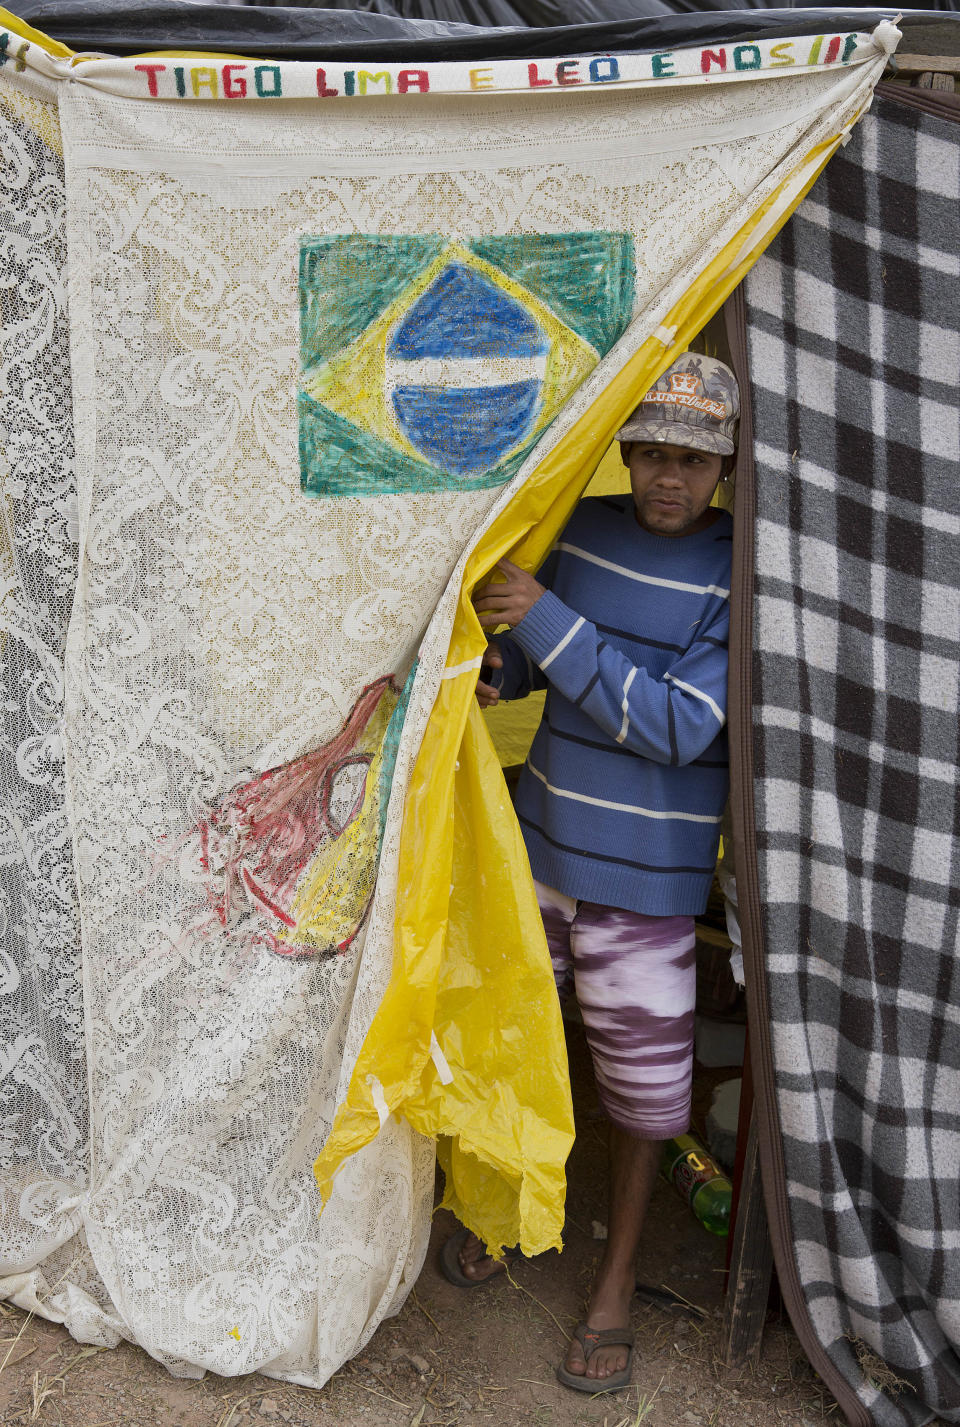 A man stands inside his shack which was built on occupied land, within view of Itaquerao stadium, in Sao Paulo, Brazil, Tuesday, May 6, 2014. Thousands of impoverished Brazilians have squatted near the stadium hosting the opening match of soccer’s biggest tournament, saying the arena’s construction is to blame for rent increases that drove them out of their homes. (AP Photo/Andre Penner)